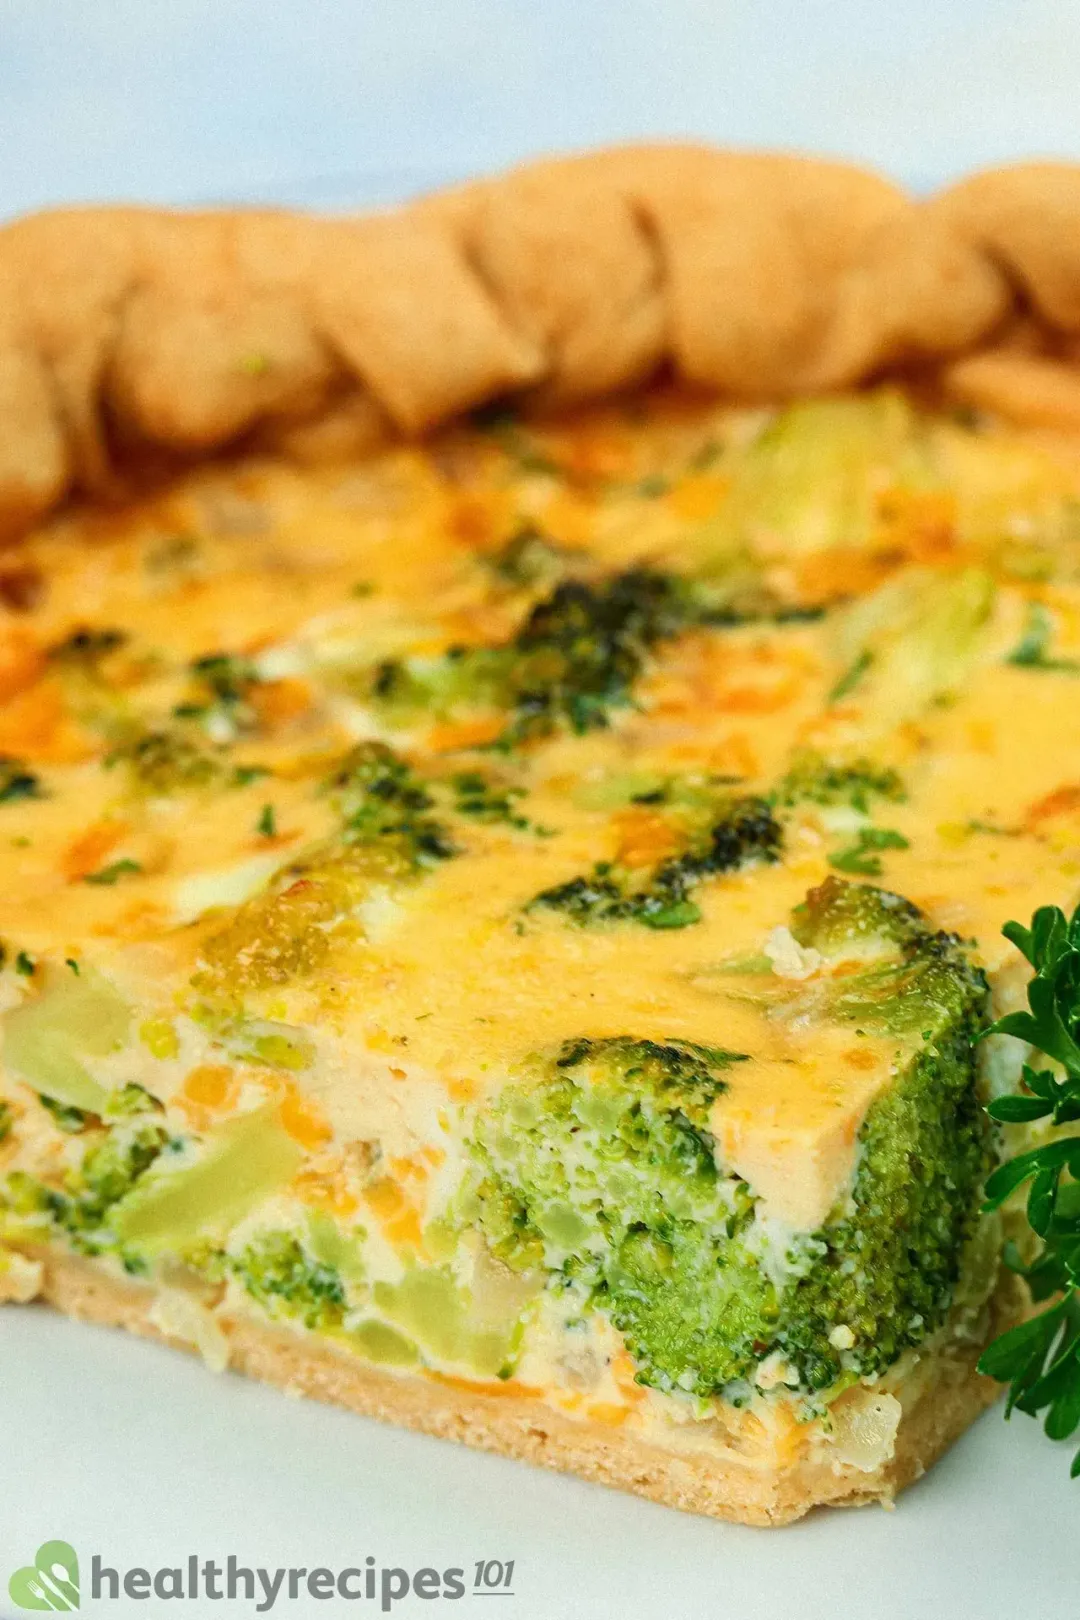 How Healthy Is Our Broccoli Quiche